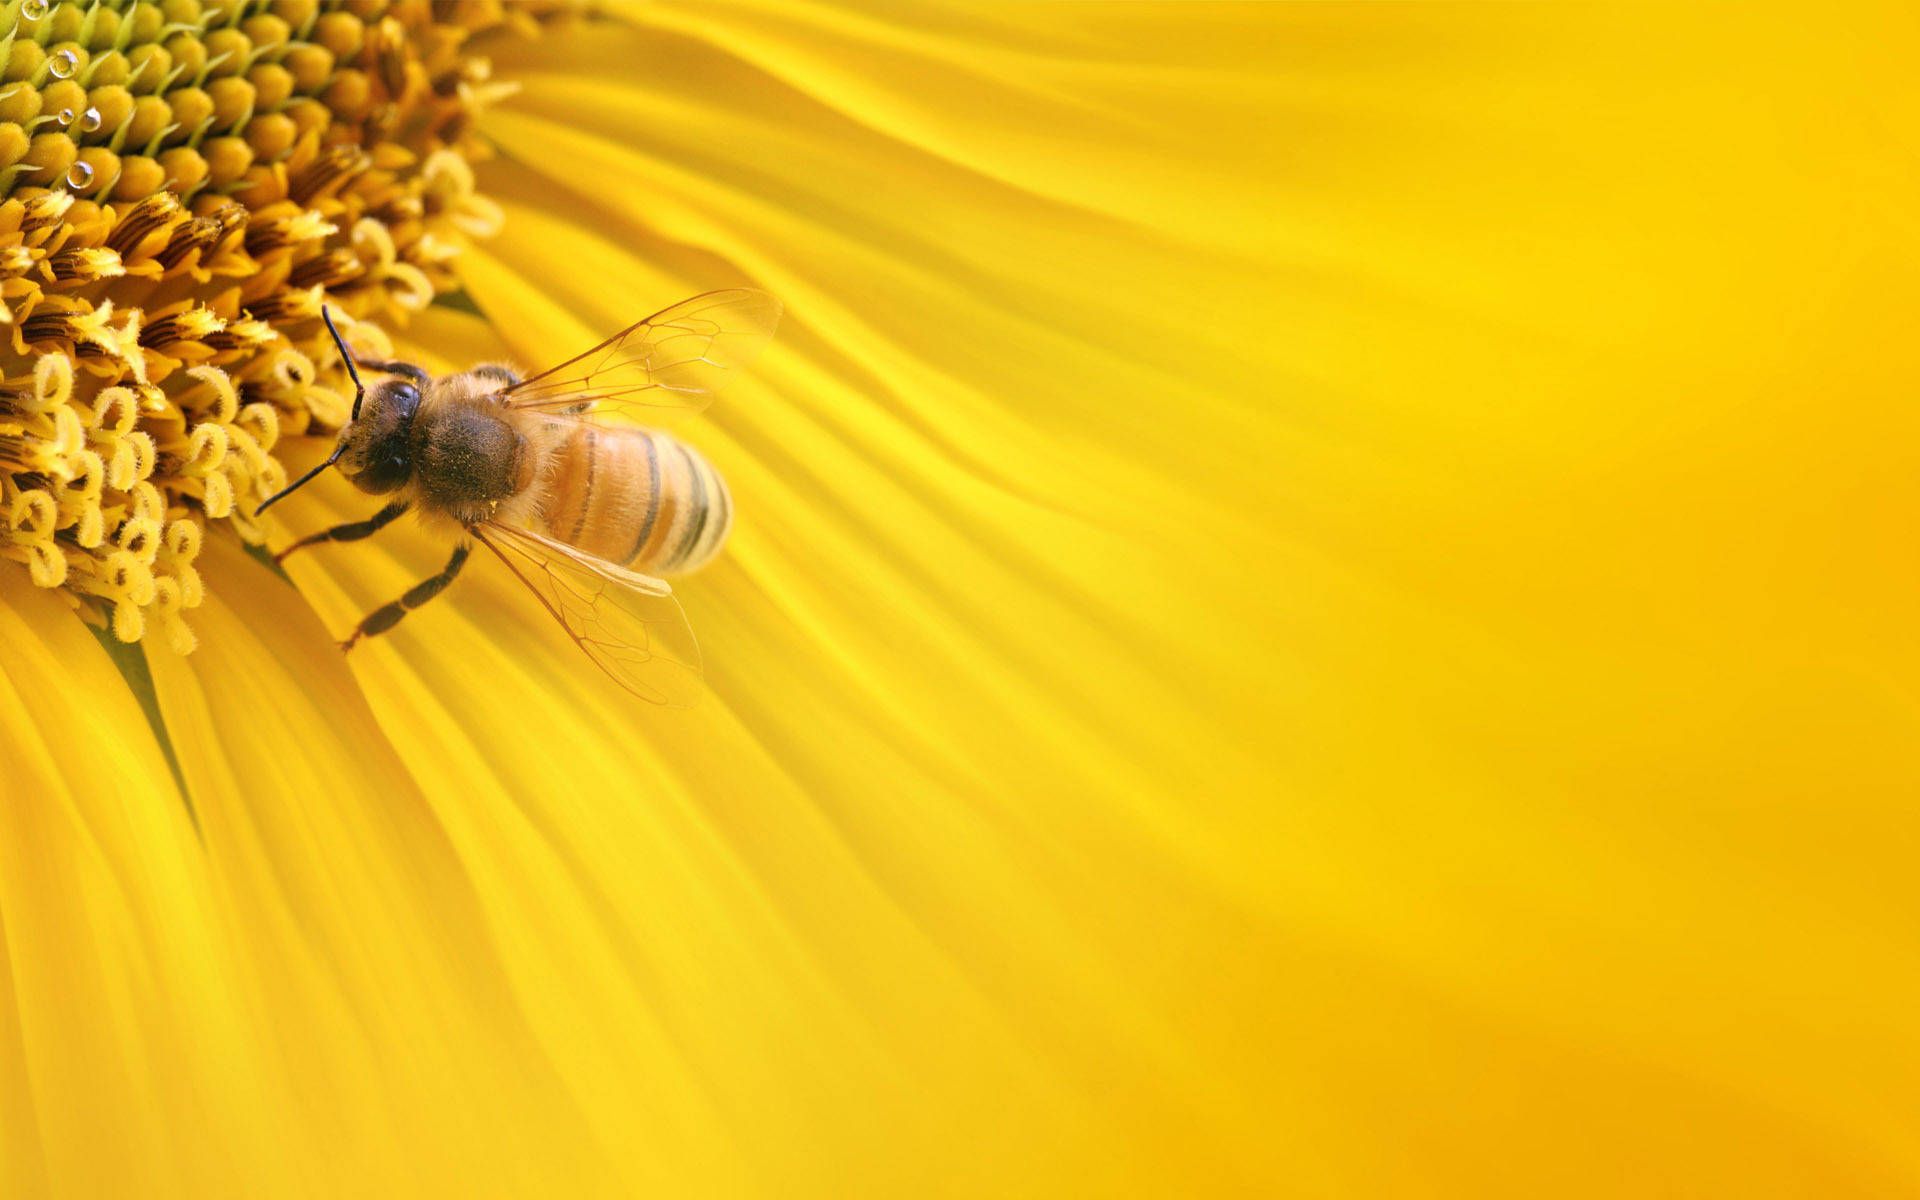 A bee is sitting on the center of yellow flower - Bee